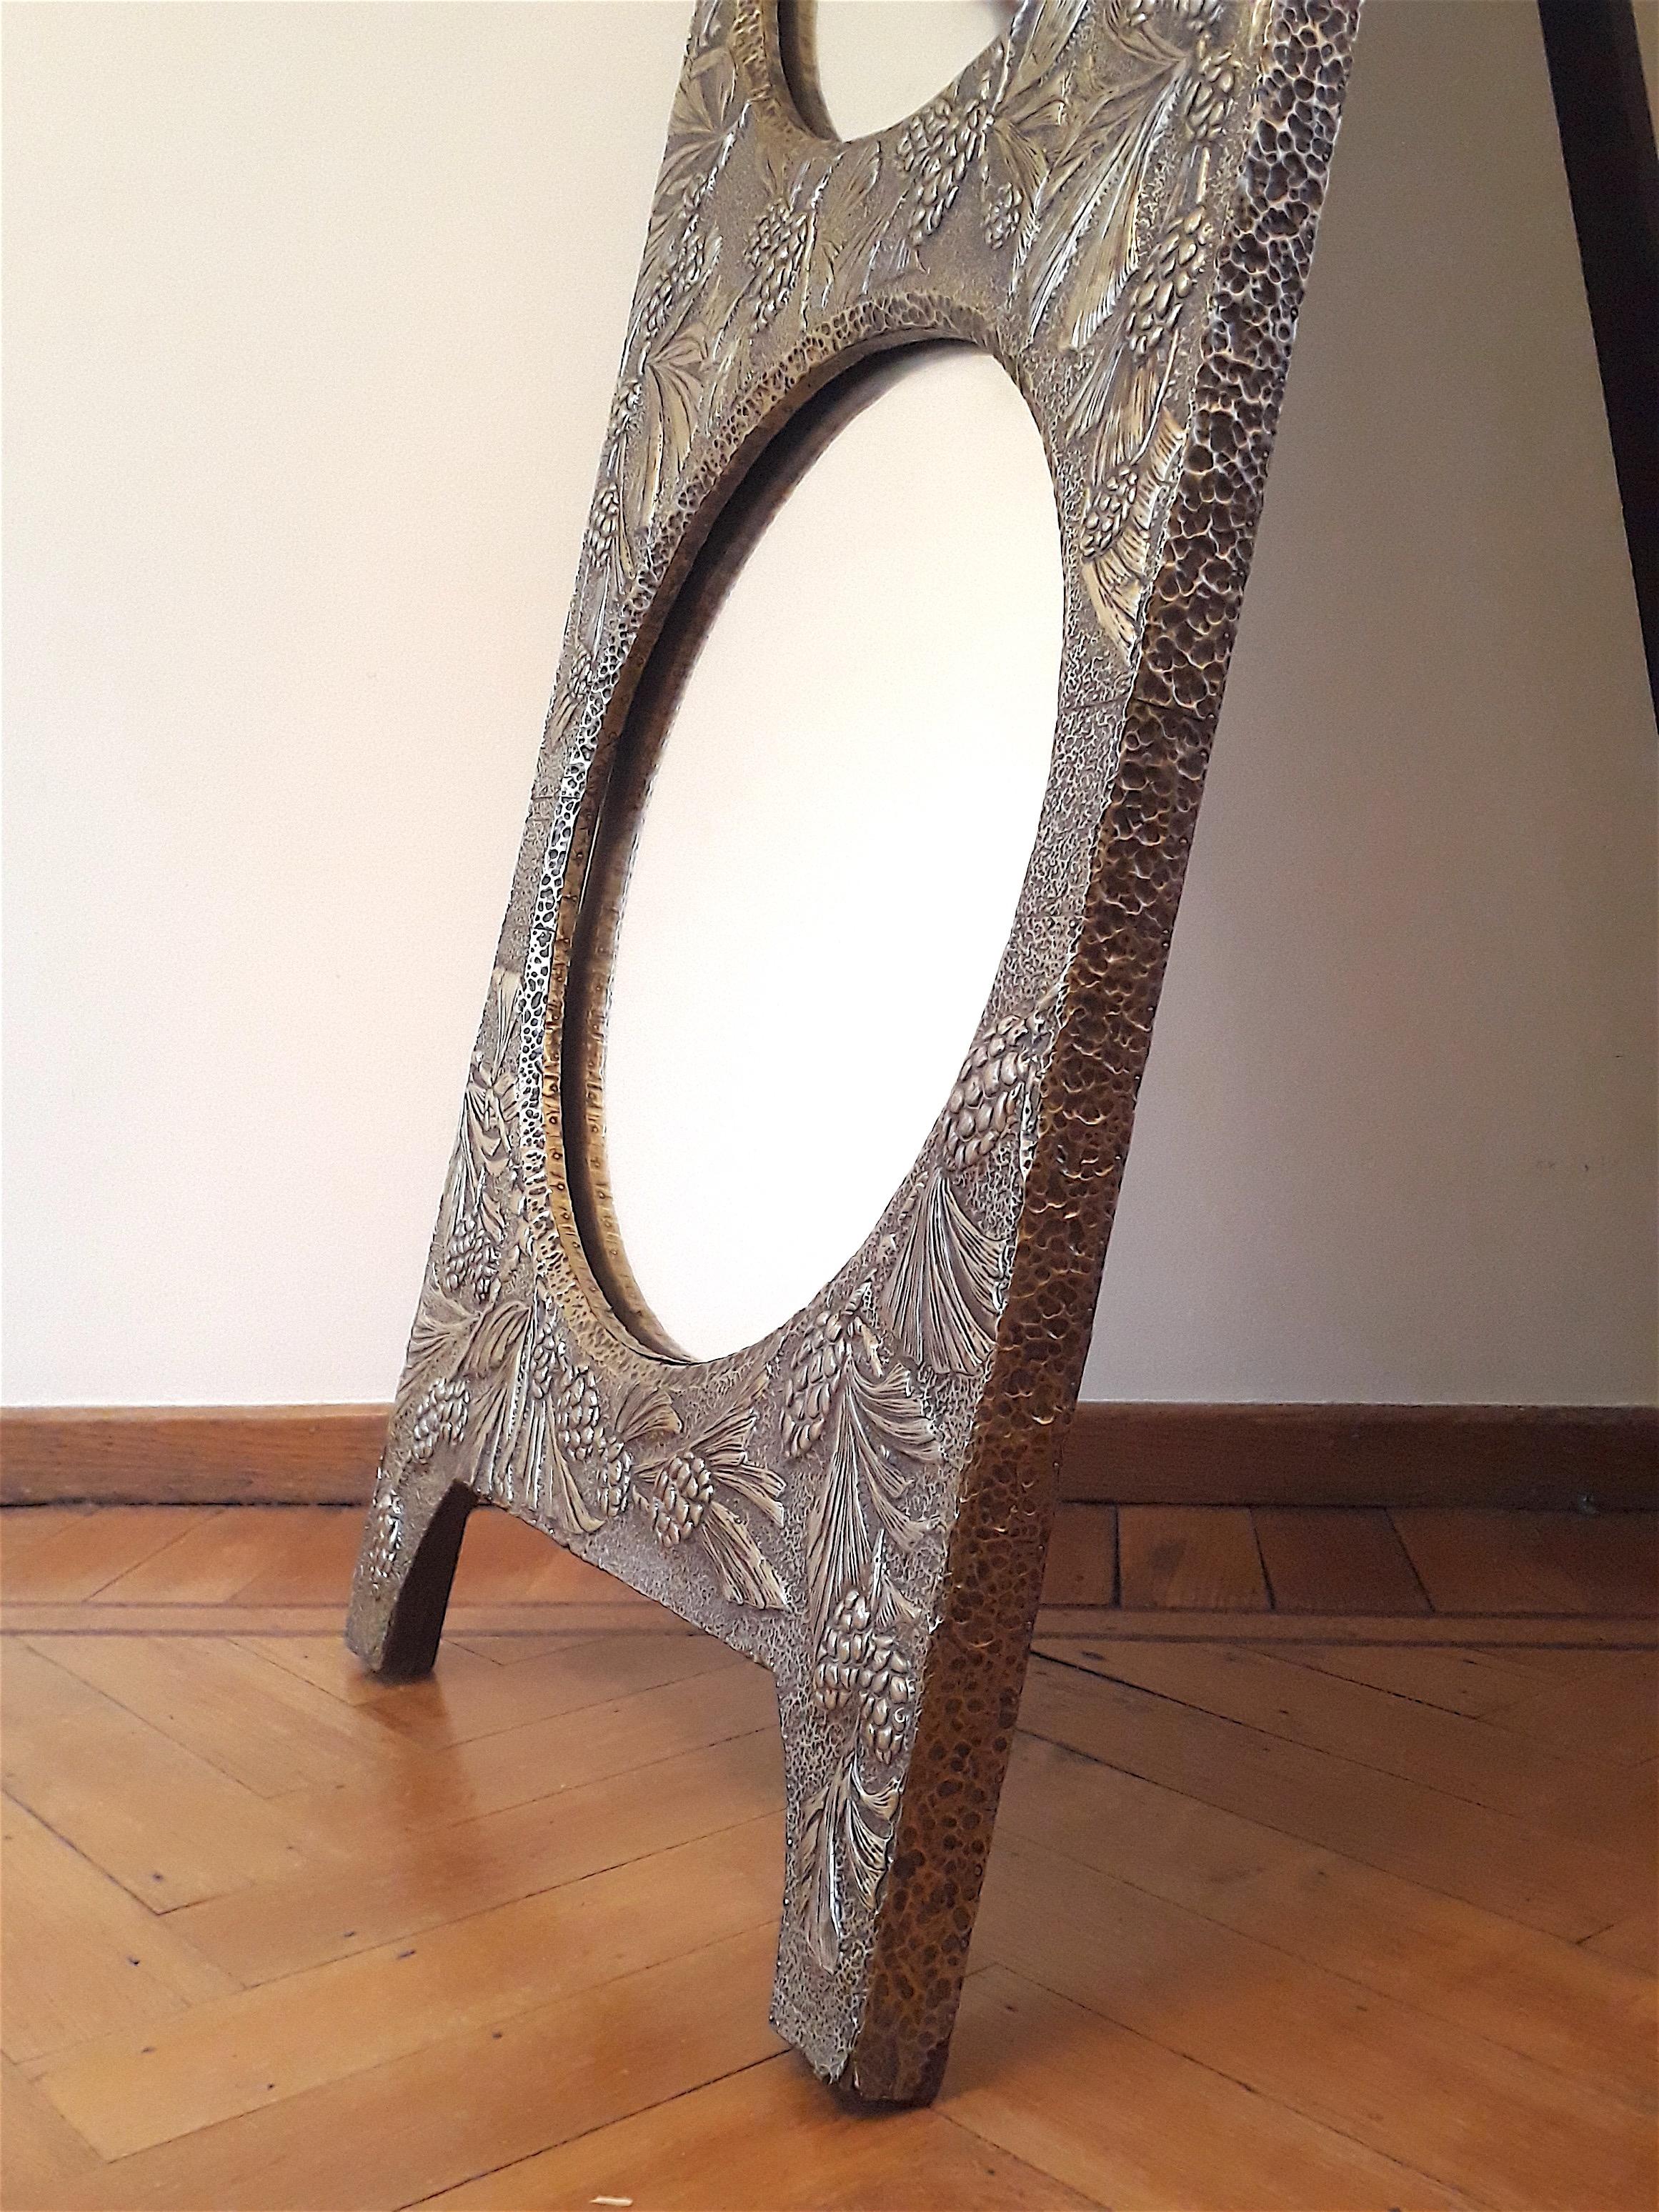 Decorative free standing Art Nouveau mirror, the front is fully covered with “pine wood” decor on brass repoussé. Beautiful craftsmanship dating from the early 20th century.